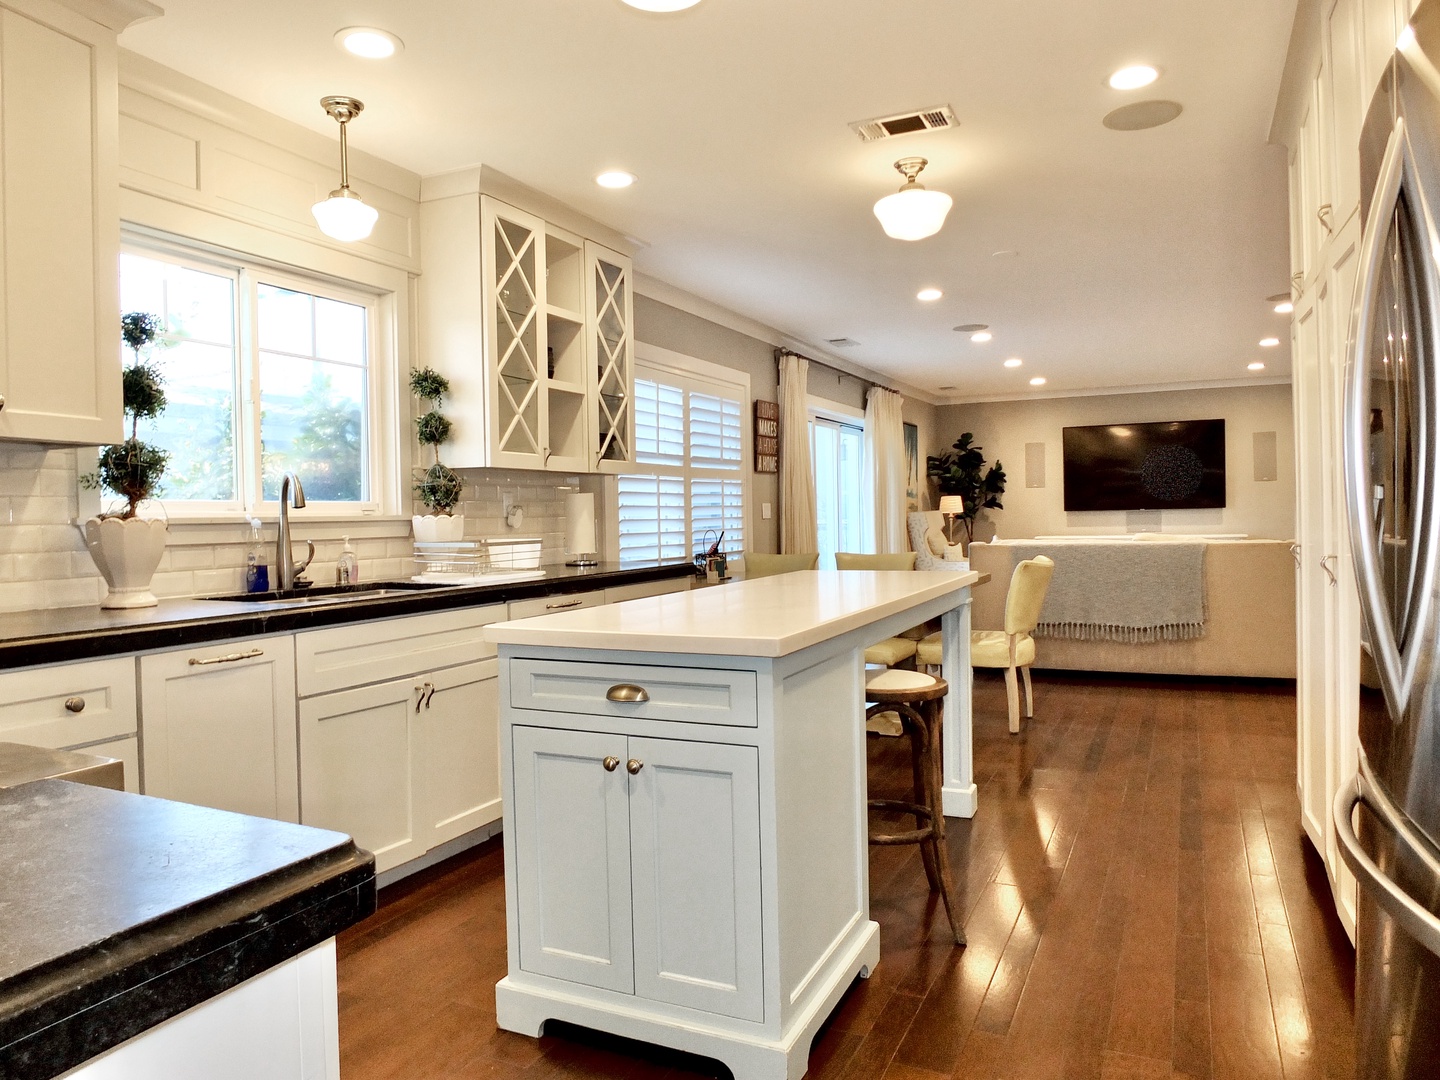 The chic kitchen is a chef’s dream, providing all the comforts of home